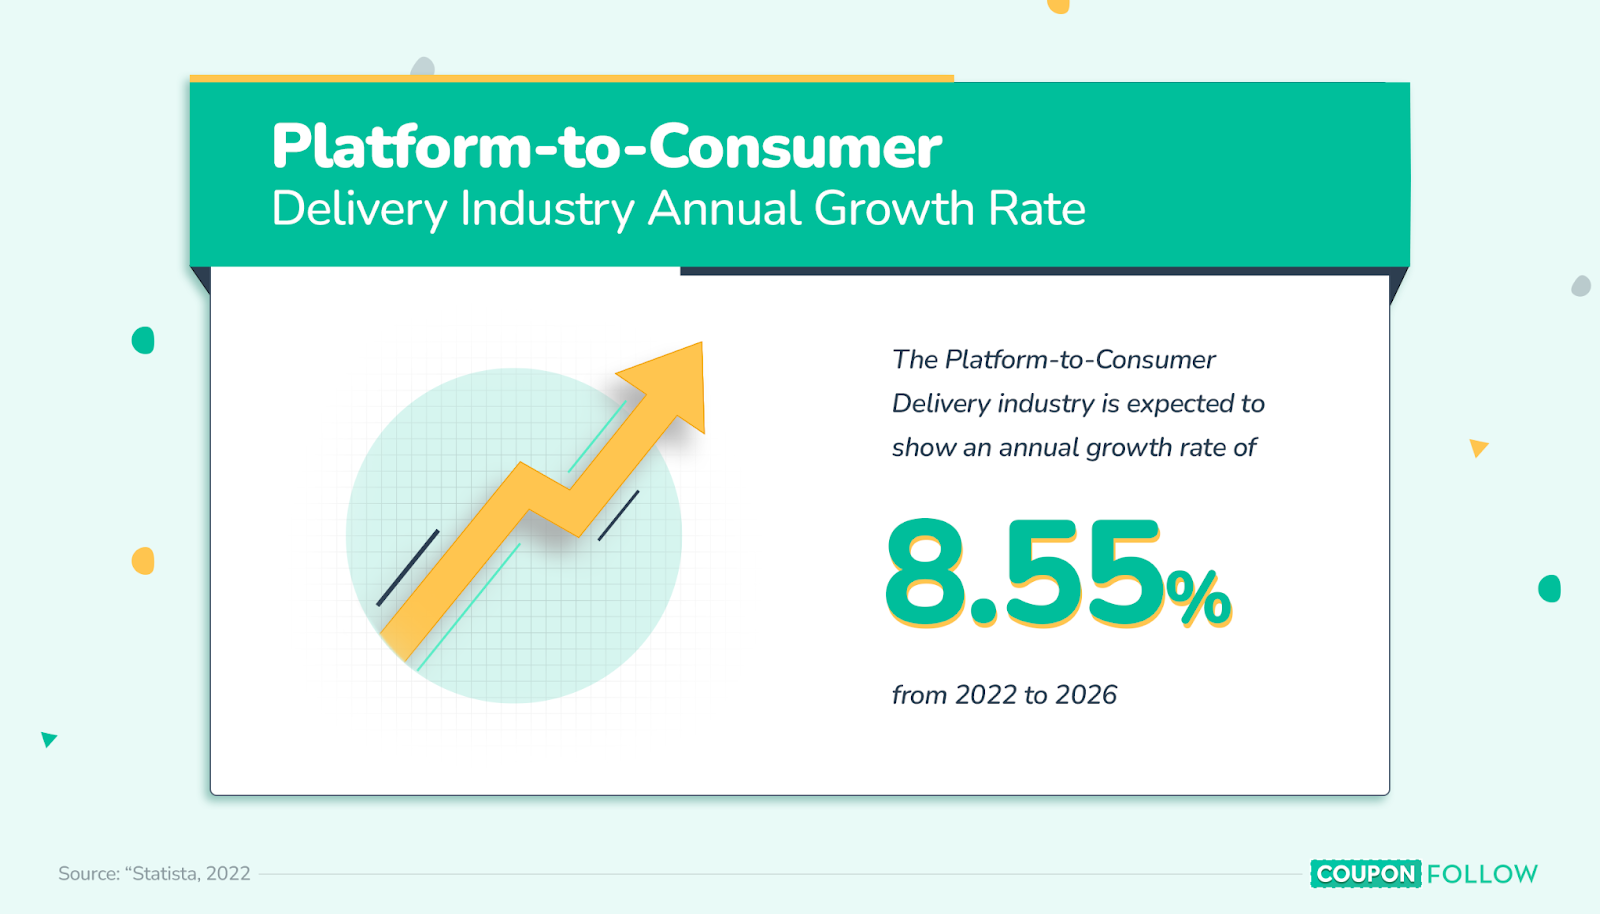  image showing the expected growth rate of the platform-to-consumer industry